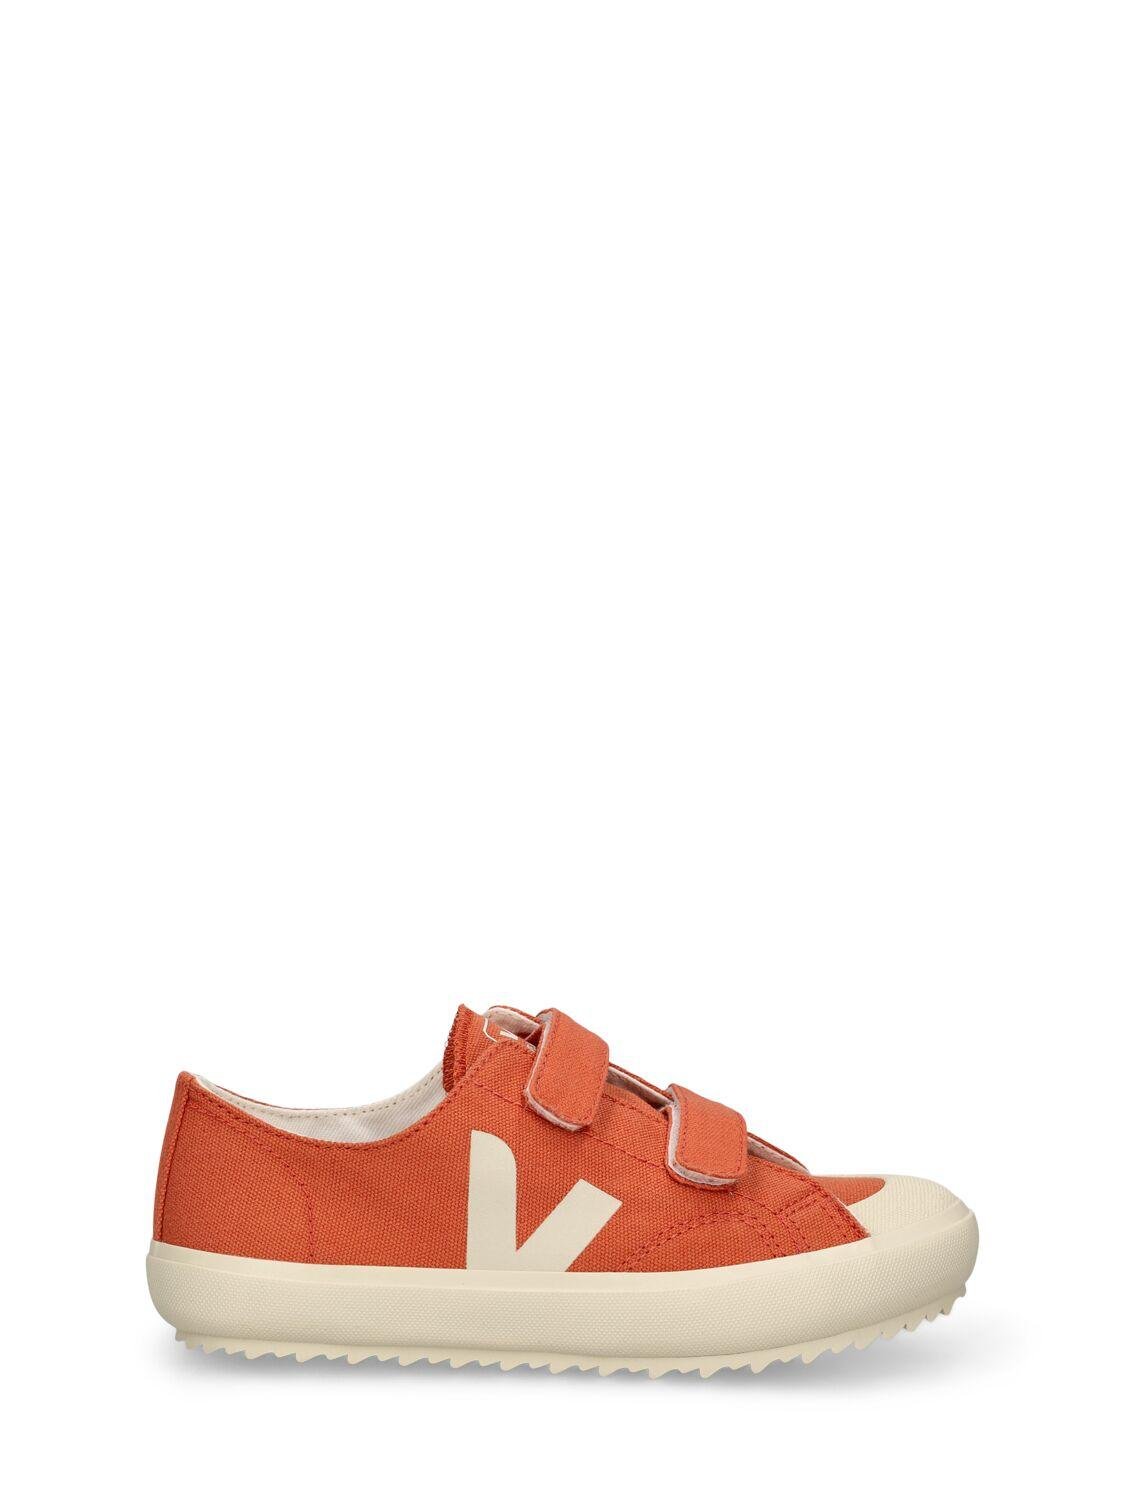 Ollie Cotton Canvas Strap Sneakers by VEJA